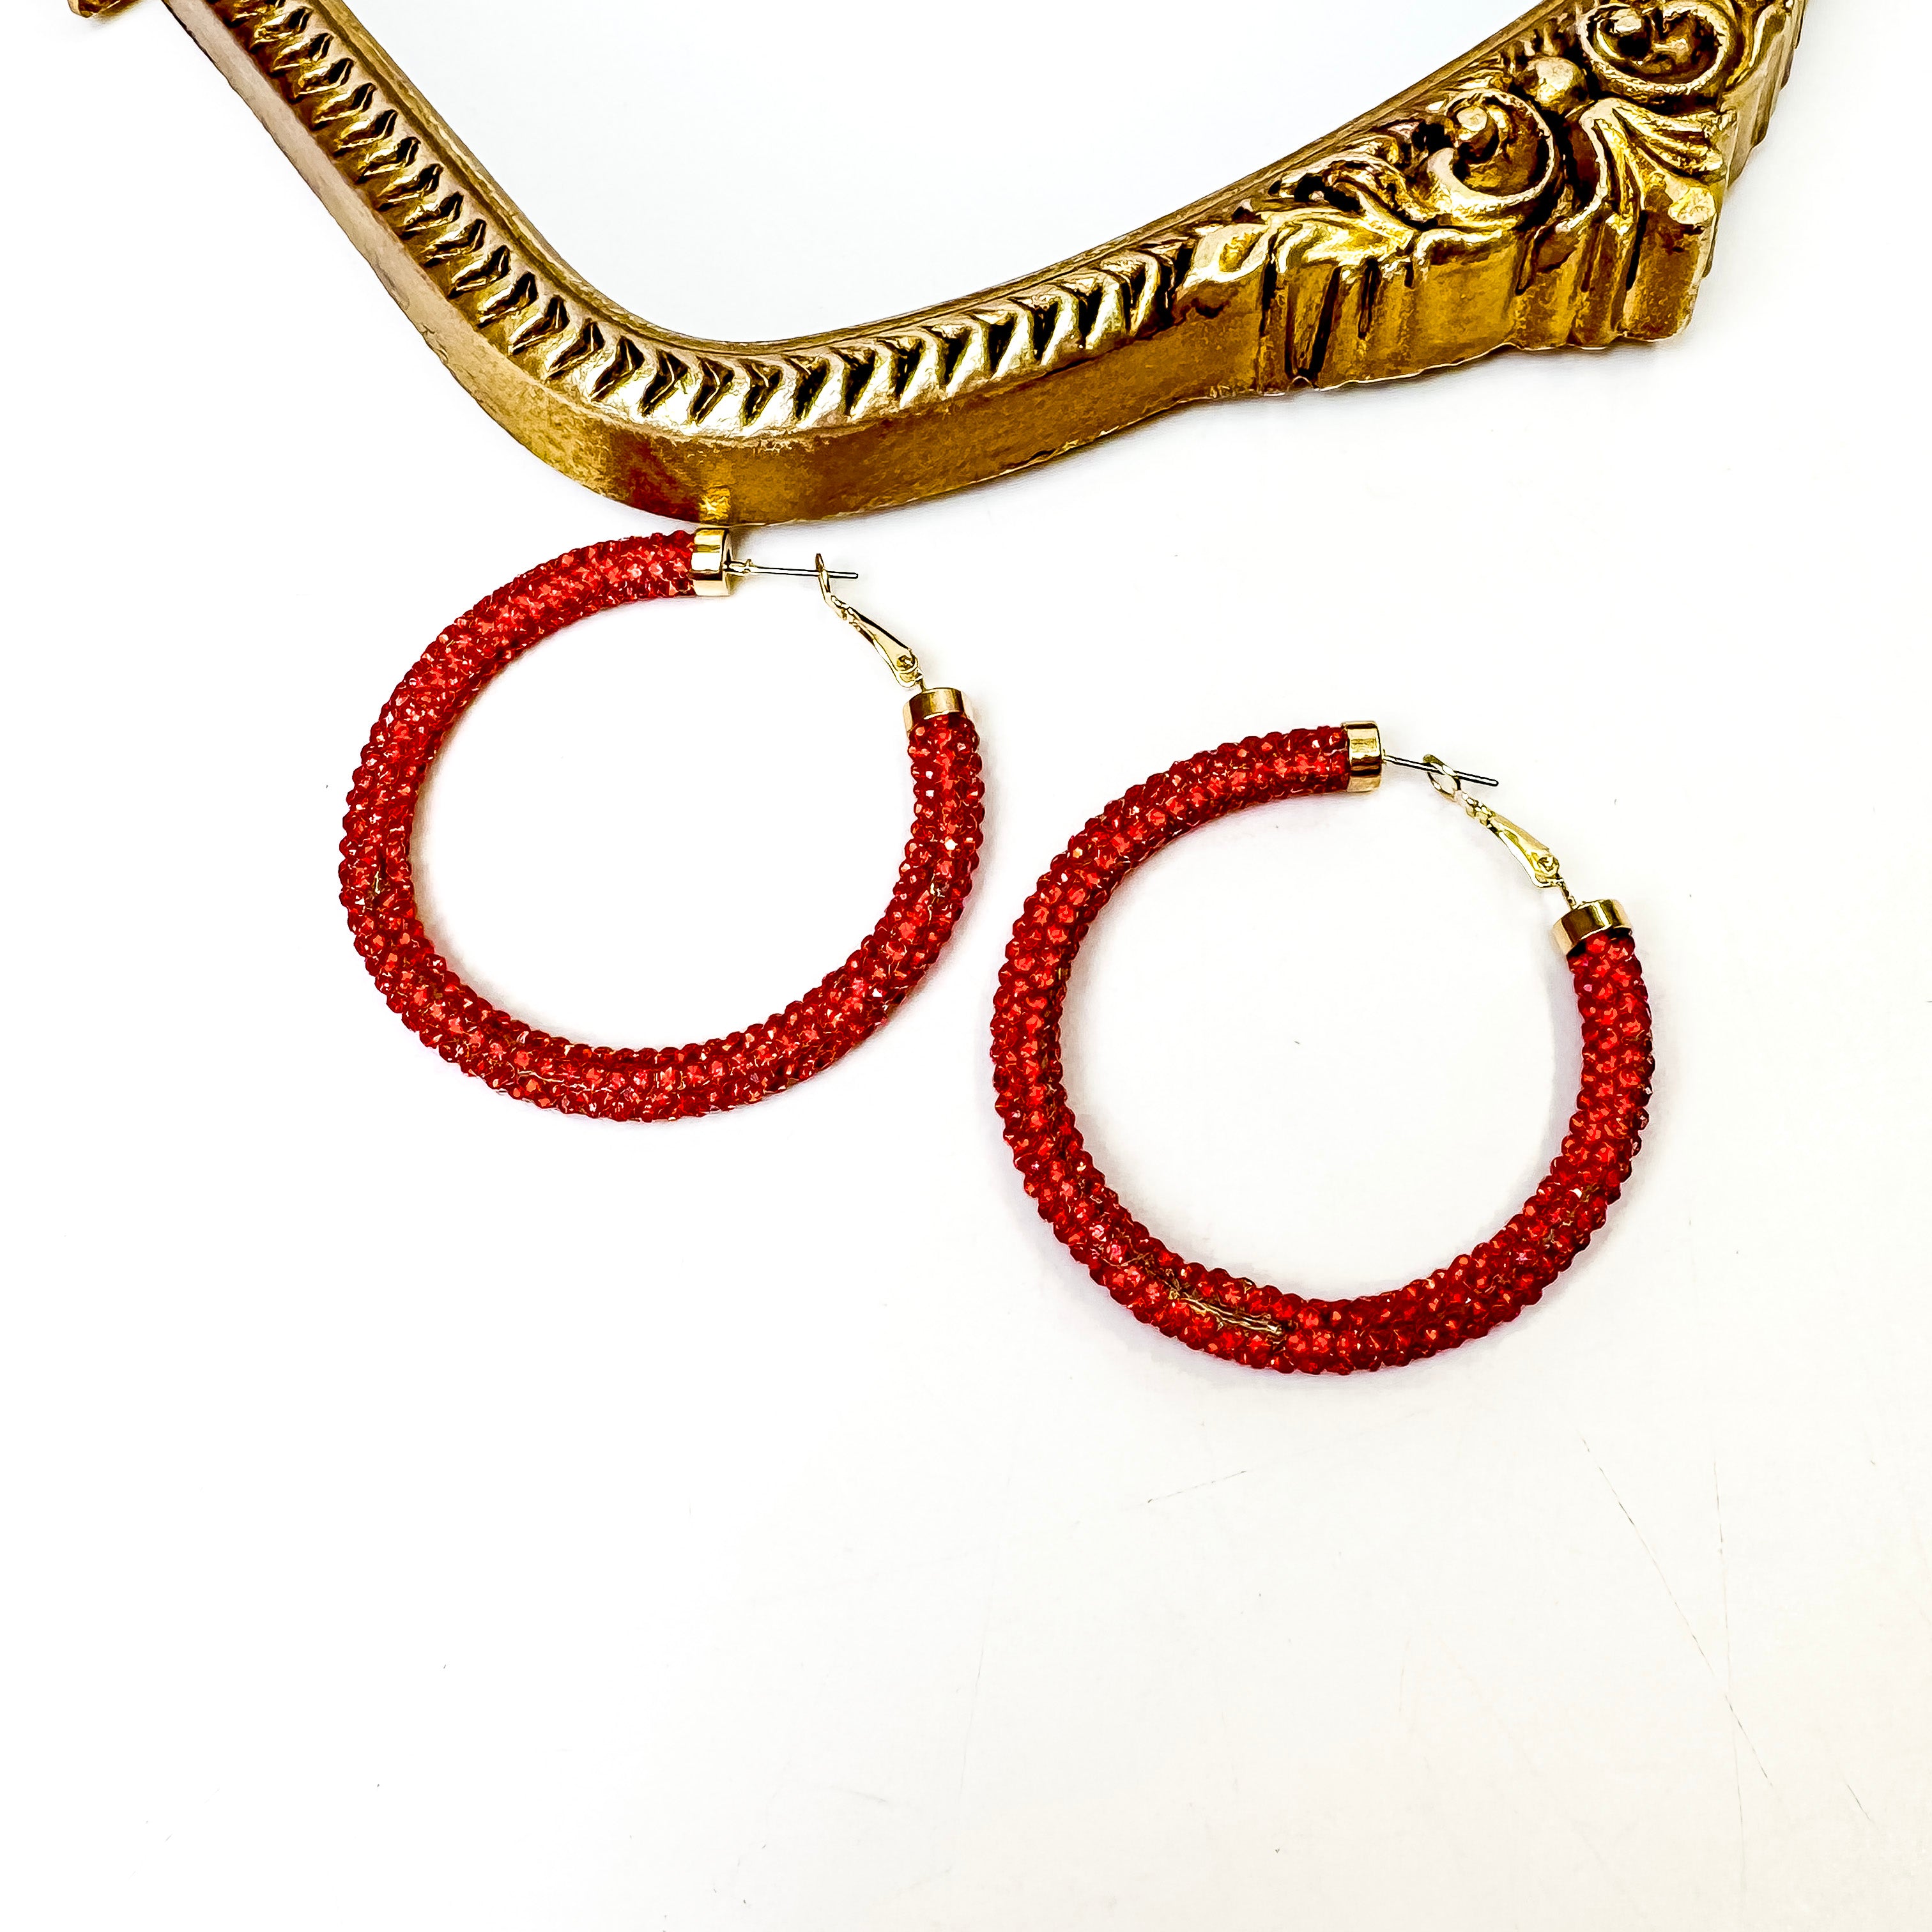 Pink Panache | Gold Tone Hoop Earrings With Rhinestone Mesh in Red - Giddy Up Glamour Boutique